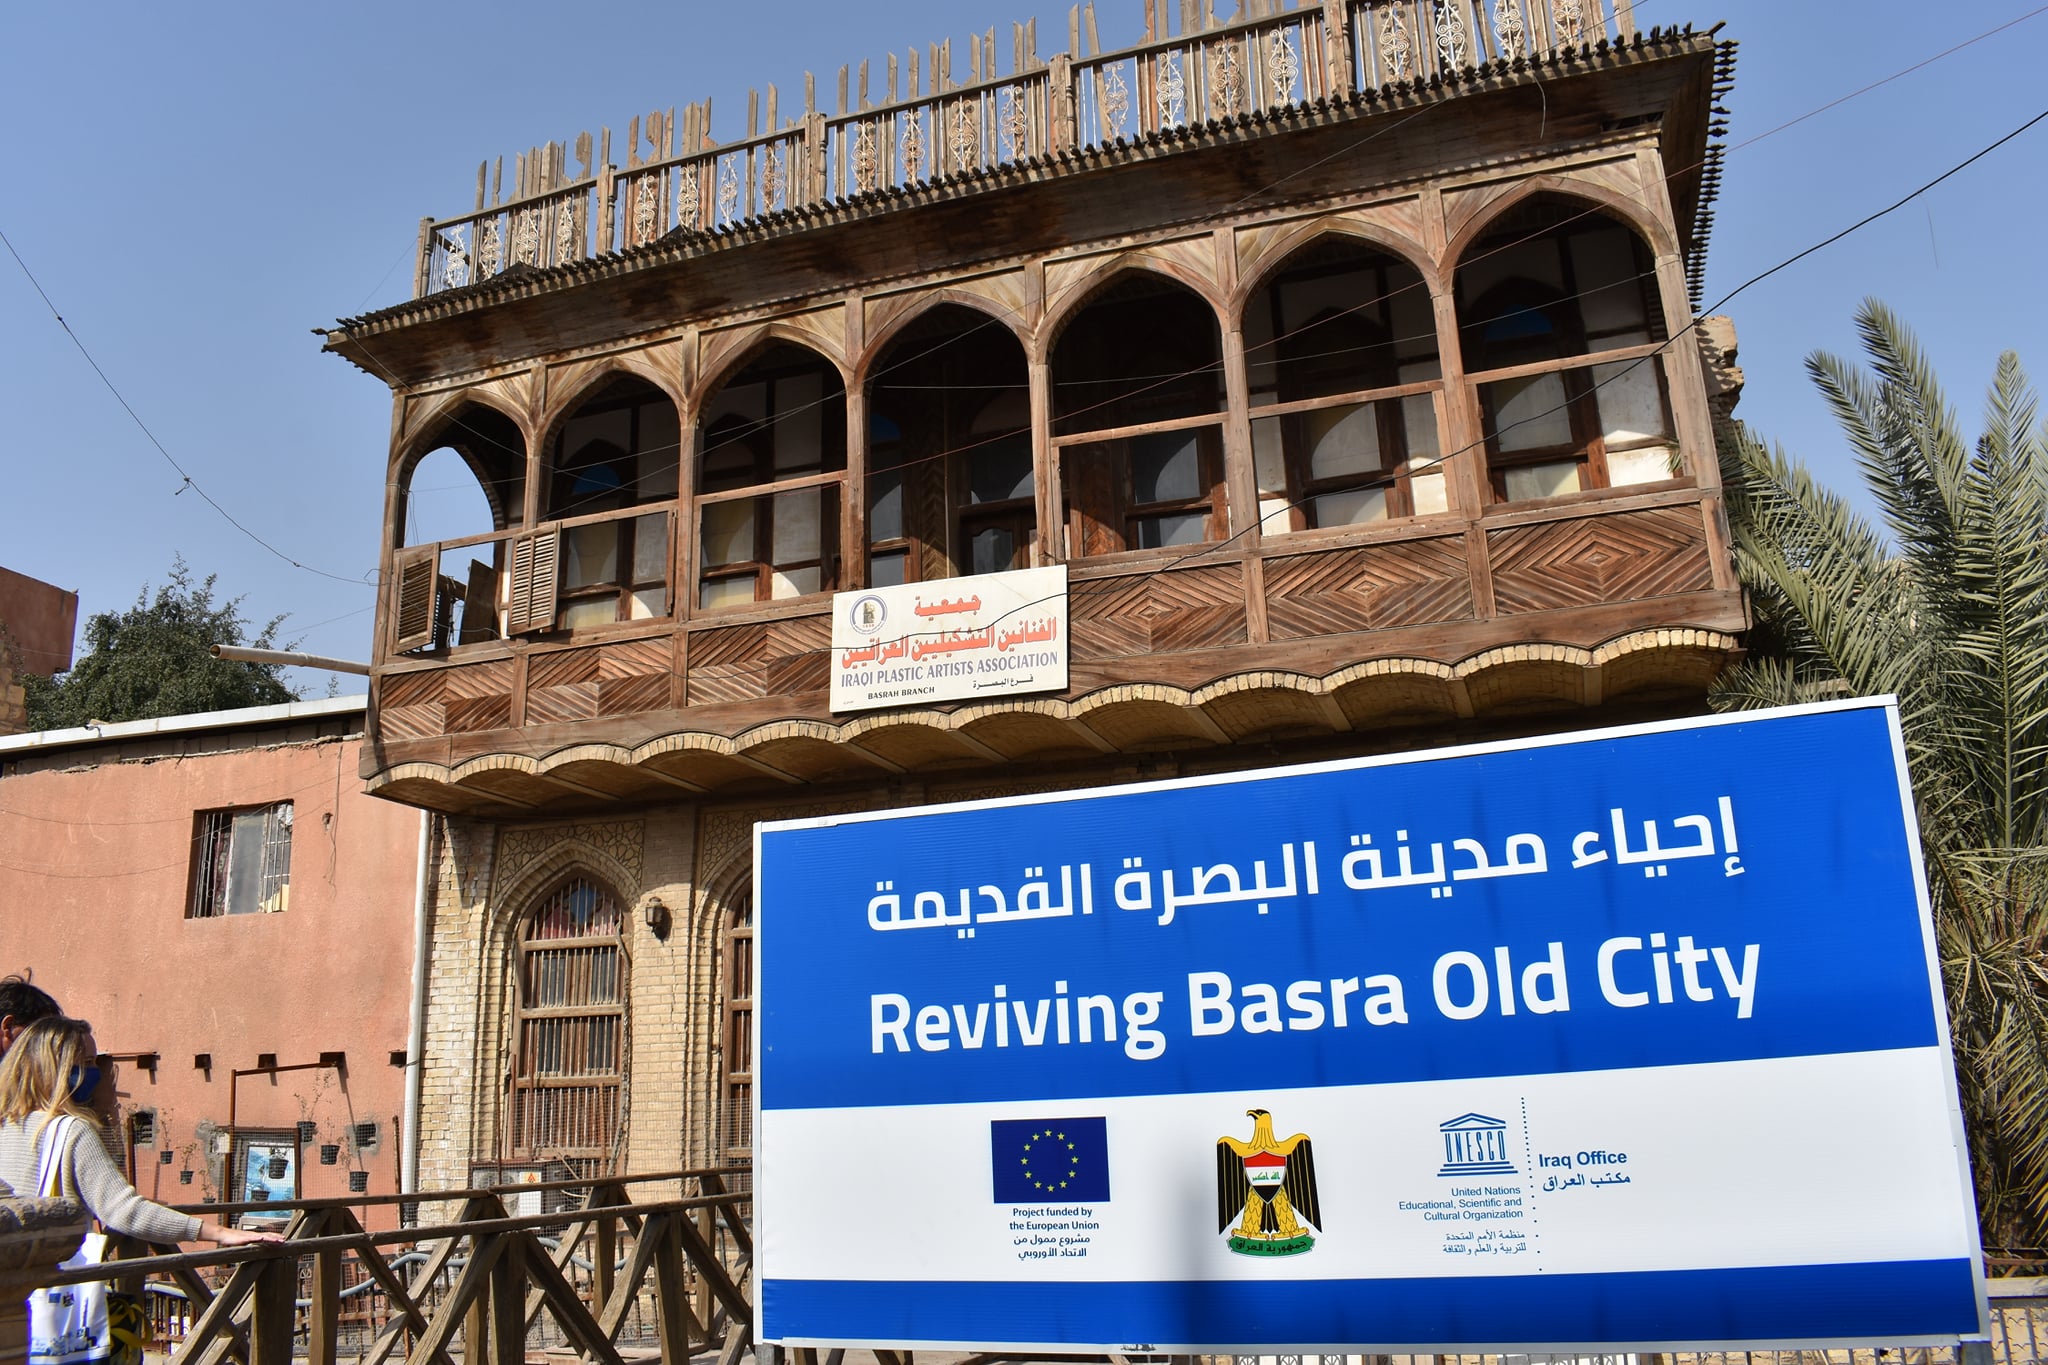 Reviving Mosul and Basra Old Cities